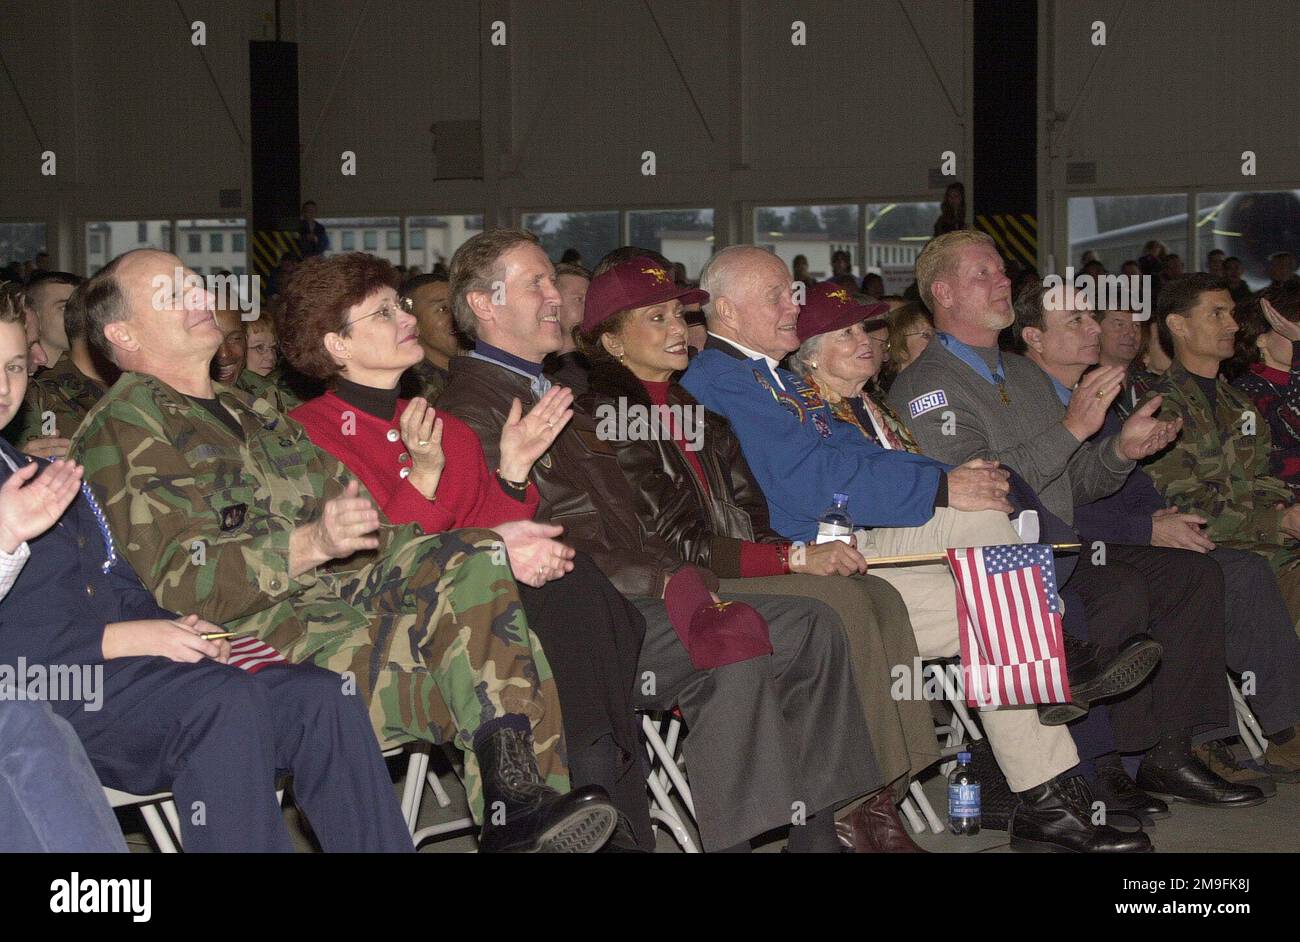 (from left to right) US Air Force General Gregory S. Martin, Commander, US Air Forces in Europe, Mrs. Wendy Martin, Secretary of Defense William S. Cohen, Mrs Janet Langhart Cohen, Senator John Glenn, Mrs Anne Glenn and Medal of Honor Recipient Mr. Sammy Davis enjoy the Secretary of Defense's Holiday Show 2000 at Ramstein Air Base, Germany on December 17, 2000. Base: Ramstein Air Base State: Rheinland-Pfalz Country: Deutschland / Germany (DEU) Stock Photo